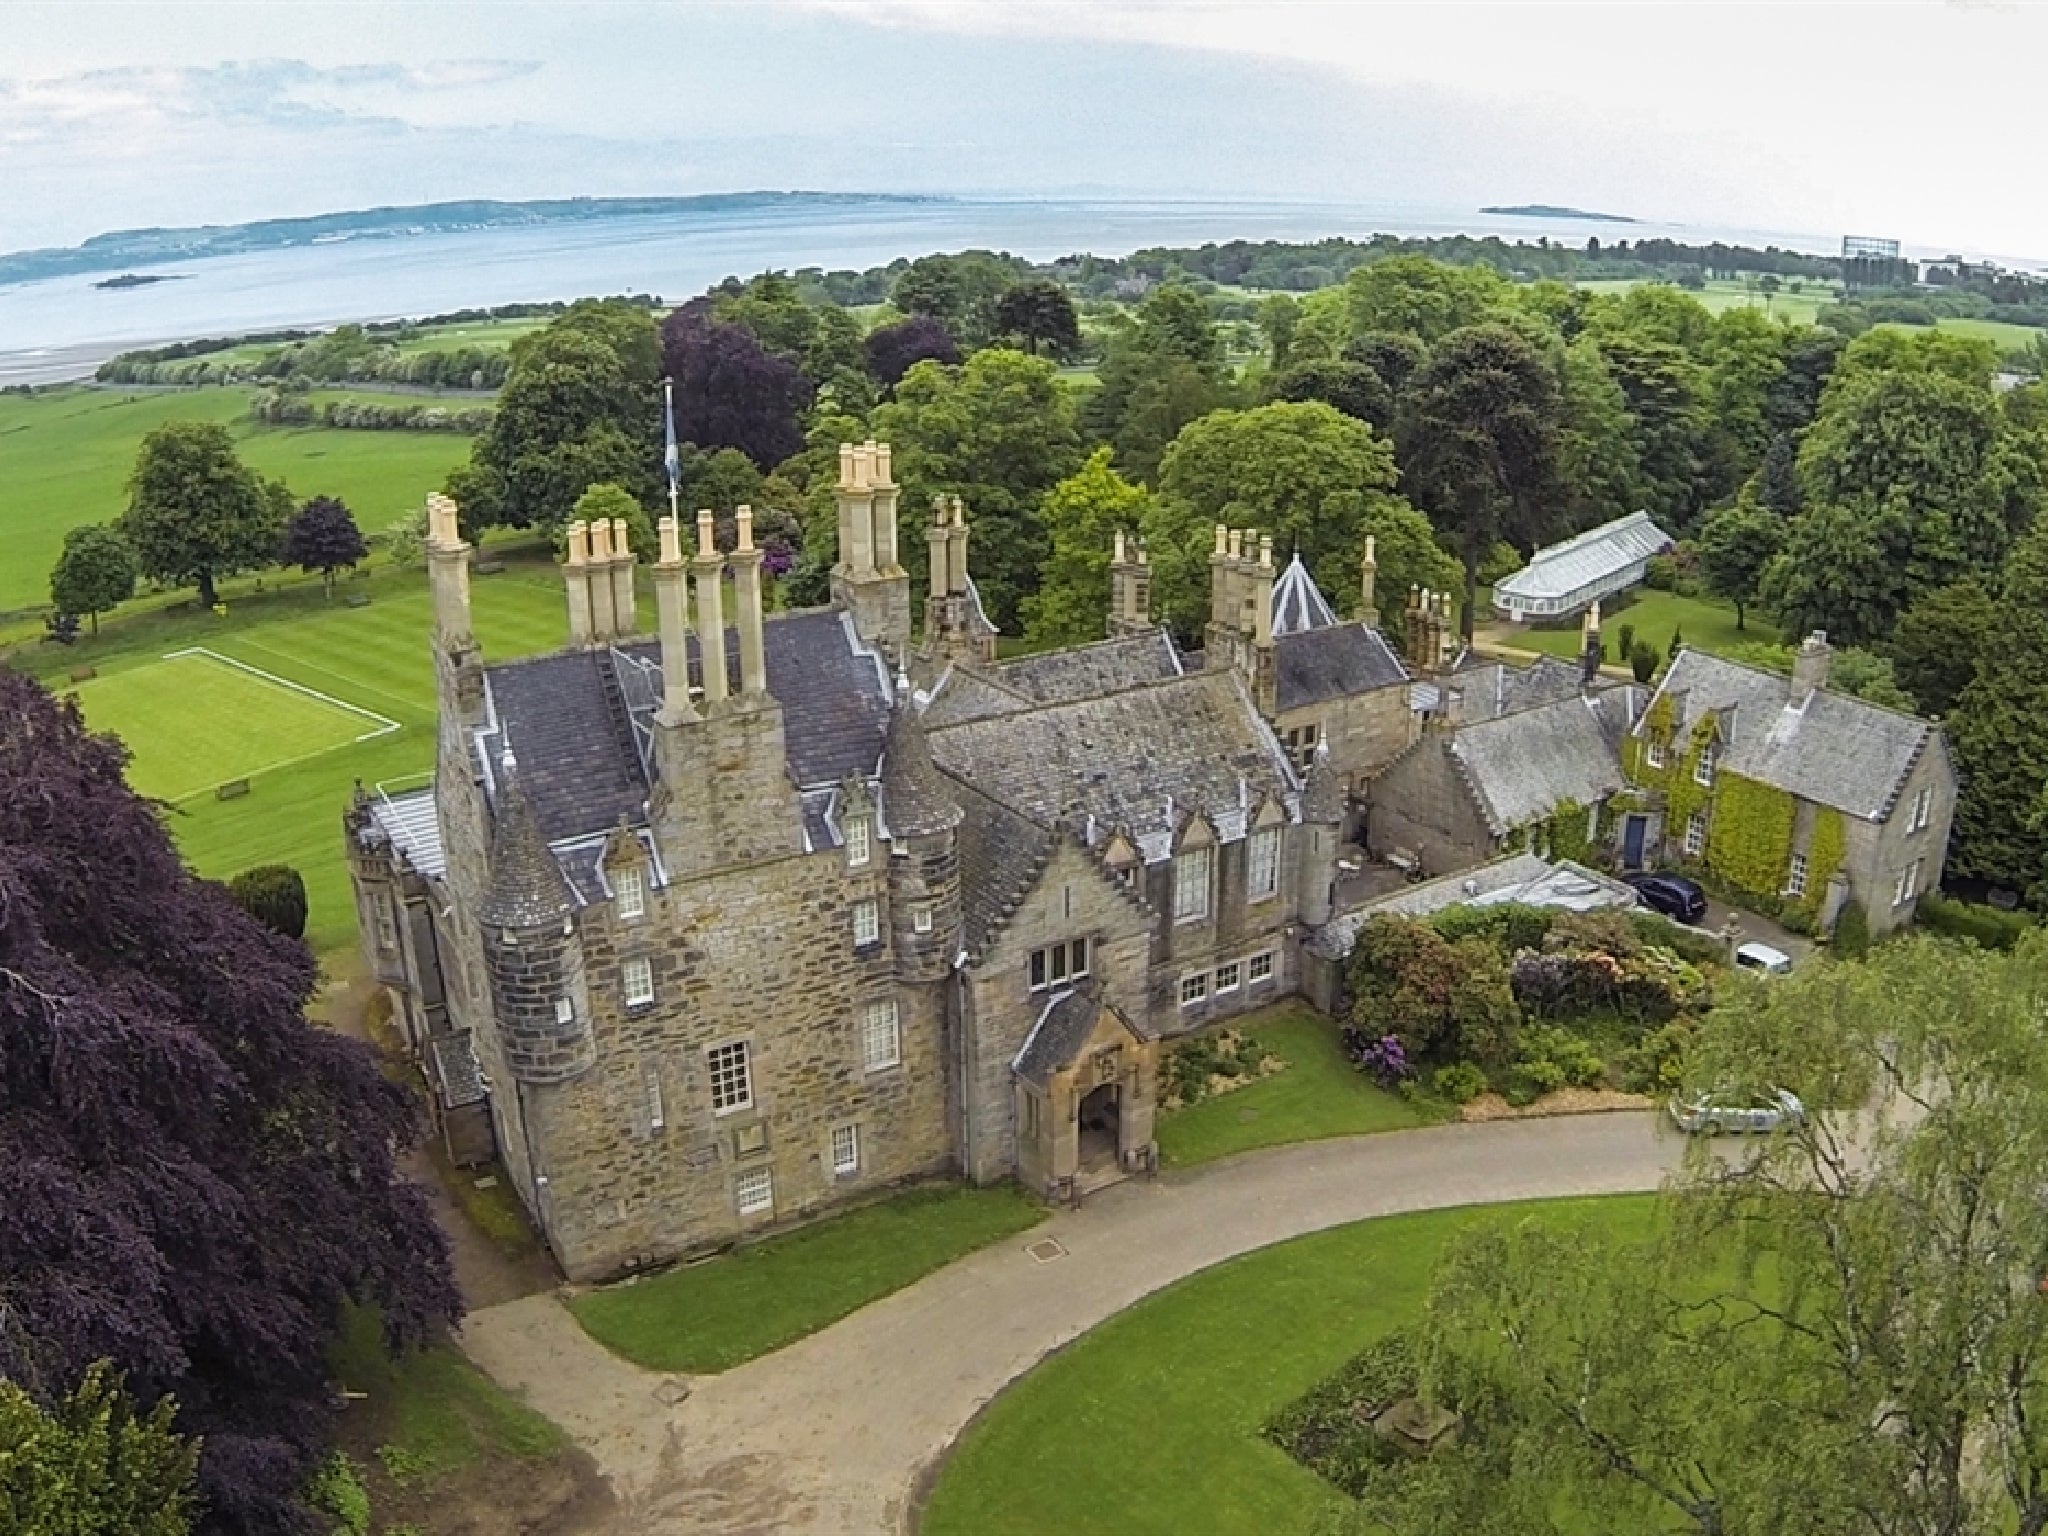 Free to visit, Lauriston Castle offers a castle and grounds to explore